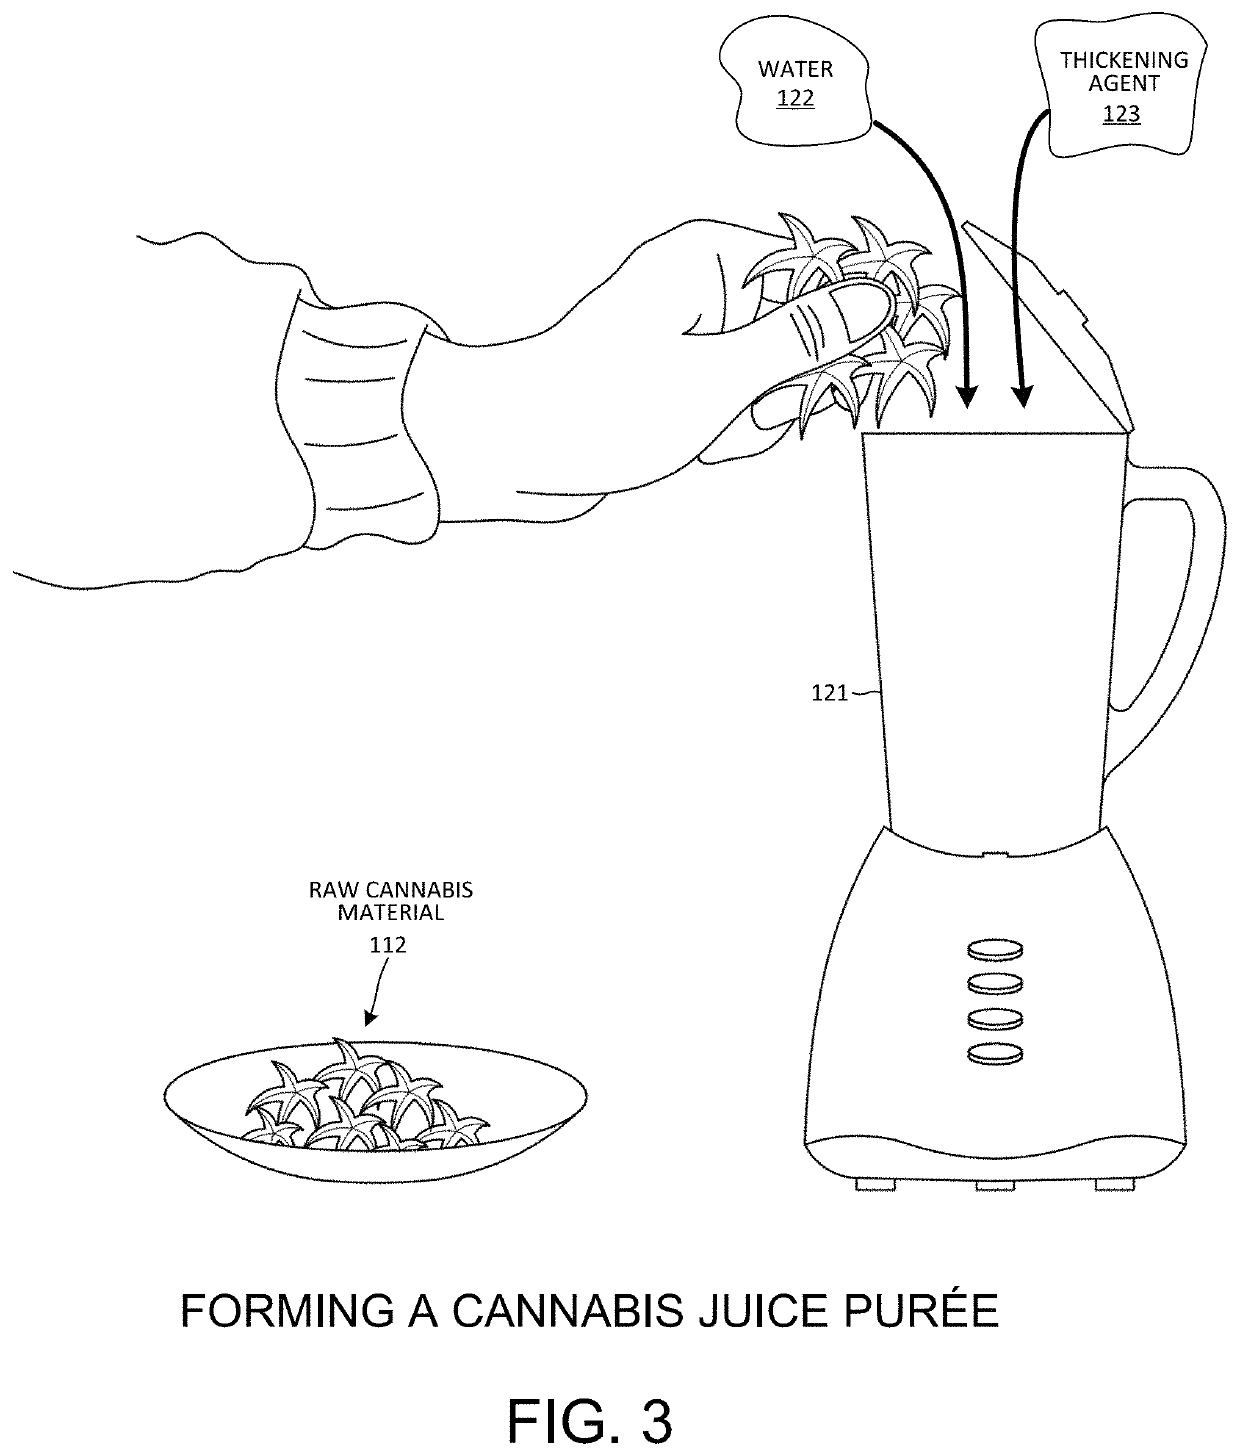 Pasteurized juice formed from raw cannabis